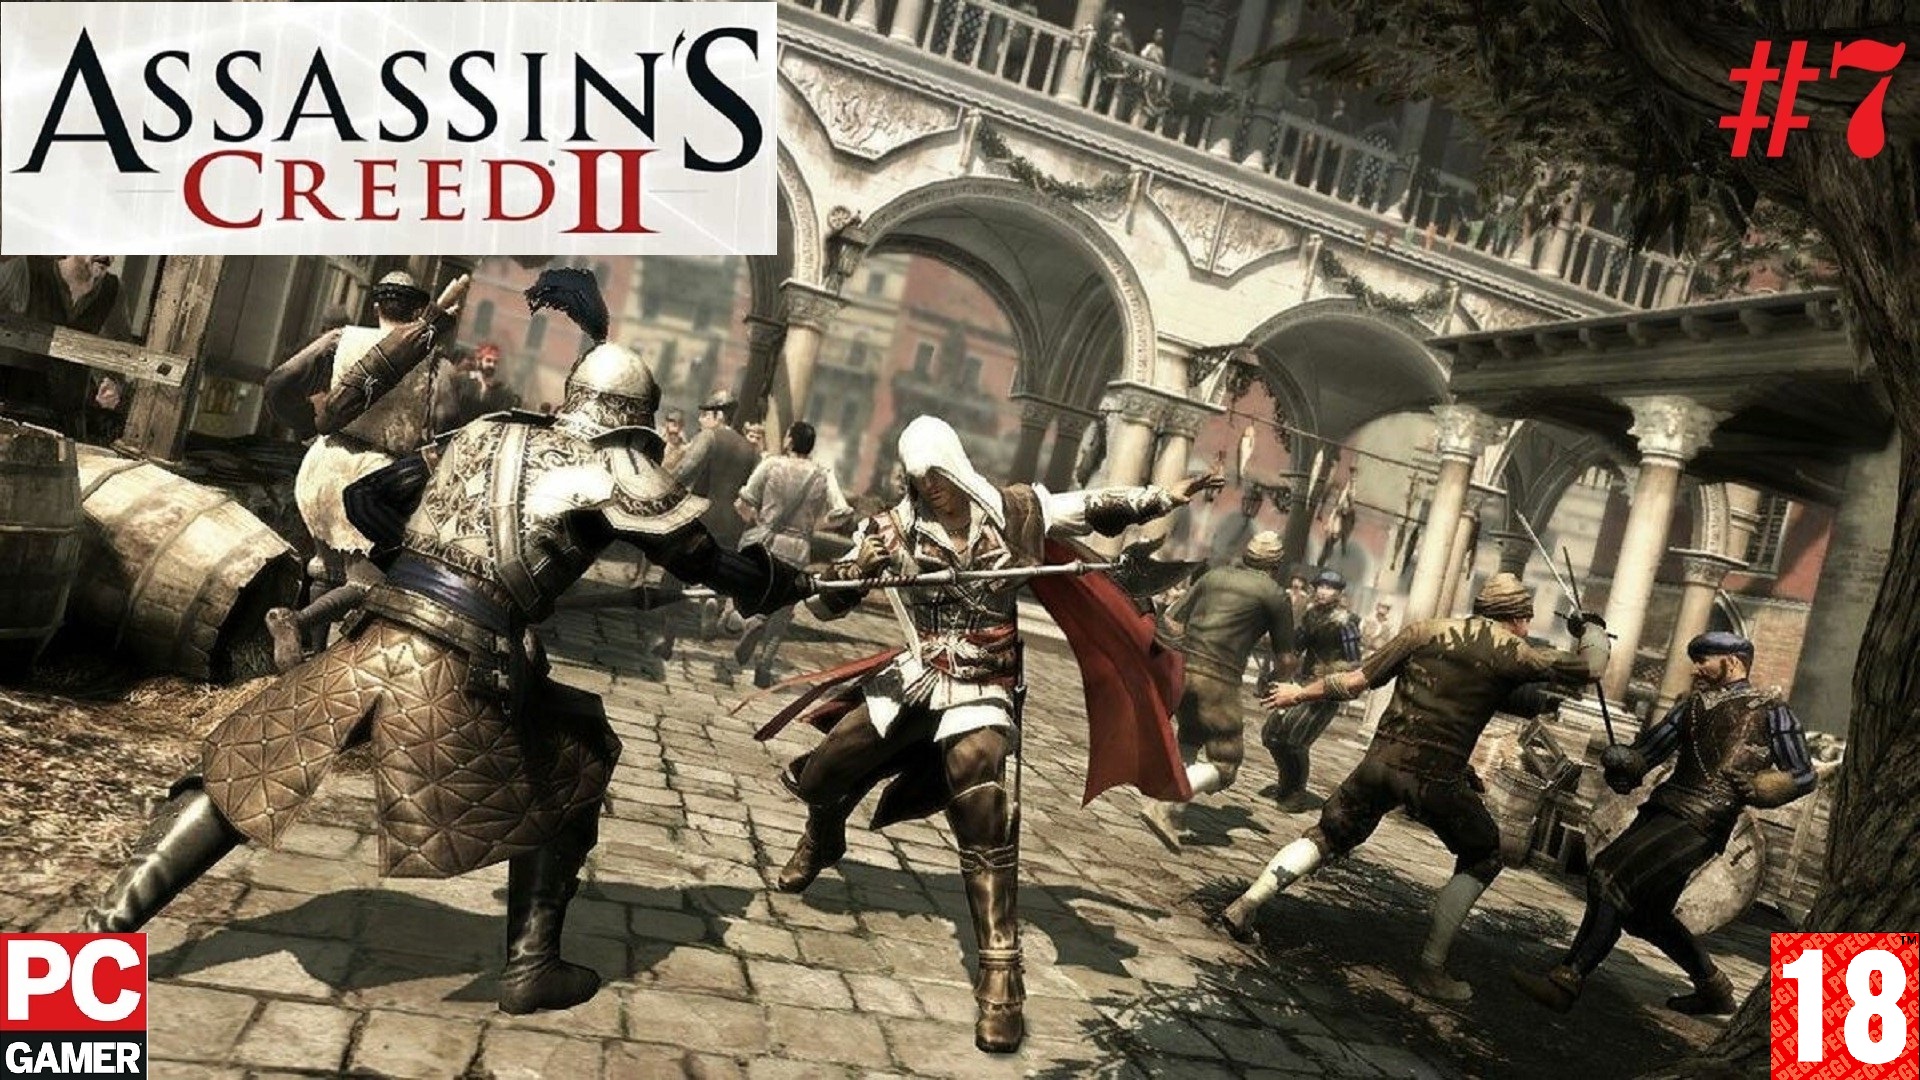 Creed 2 game. Ассасин Крид 2. Assassins Creed 2 [ps3]. Assassin's Creed 2 ps3 Скриншоты. Assassin’s Creed II – 2009.